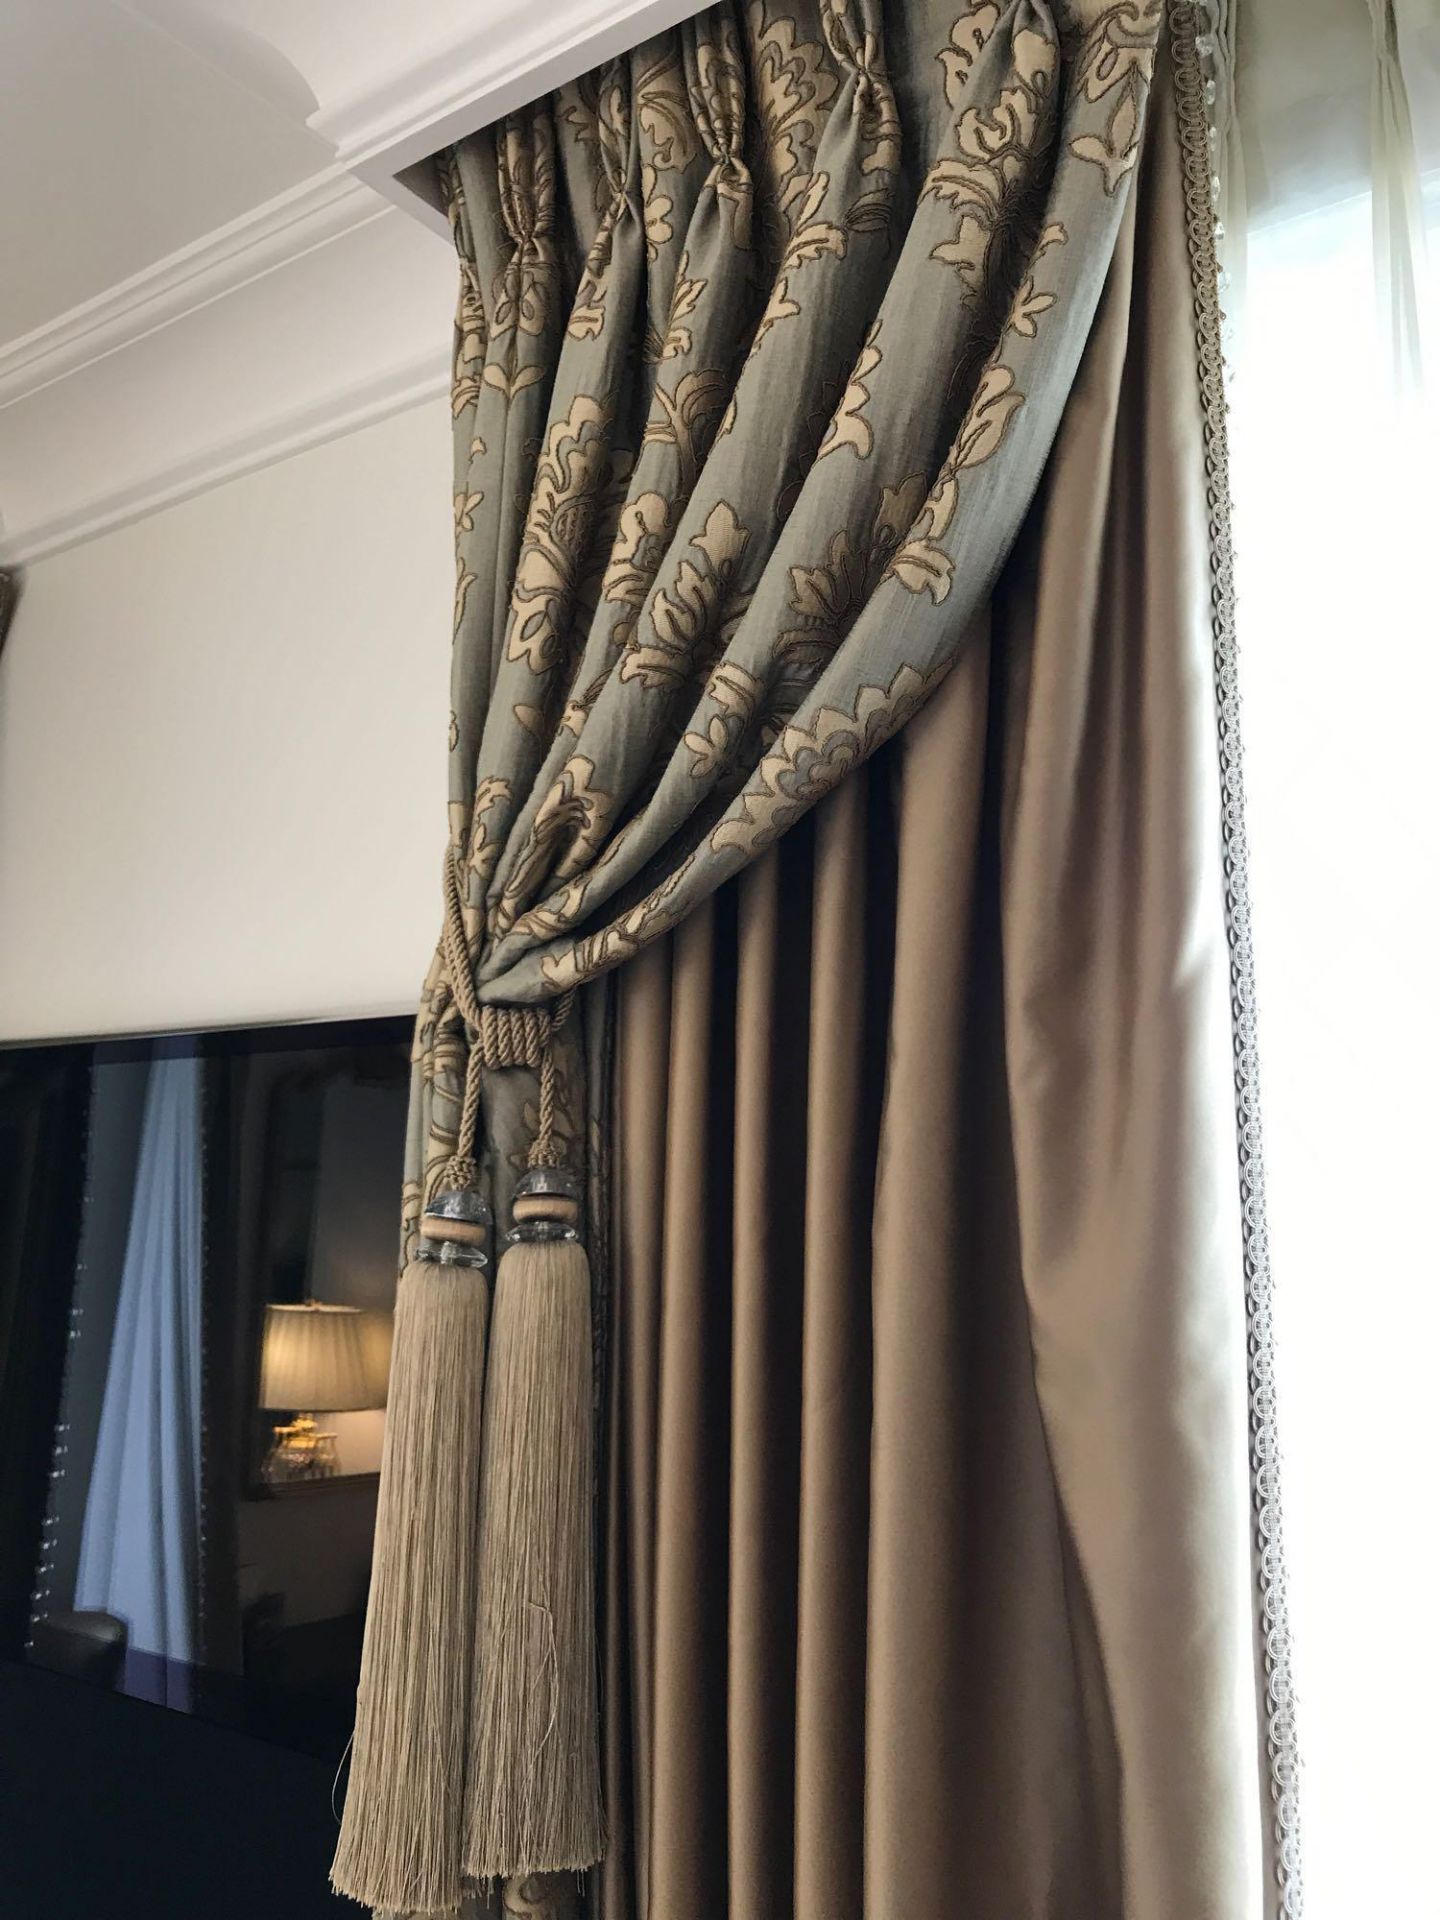 2 x Pair Of Silk Drapes And Jabots Gold With Crystal Edging And Embroidered In Gold And Silver - Image 3 of 3